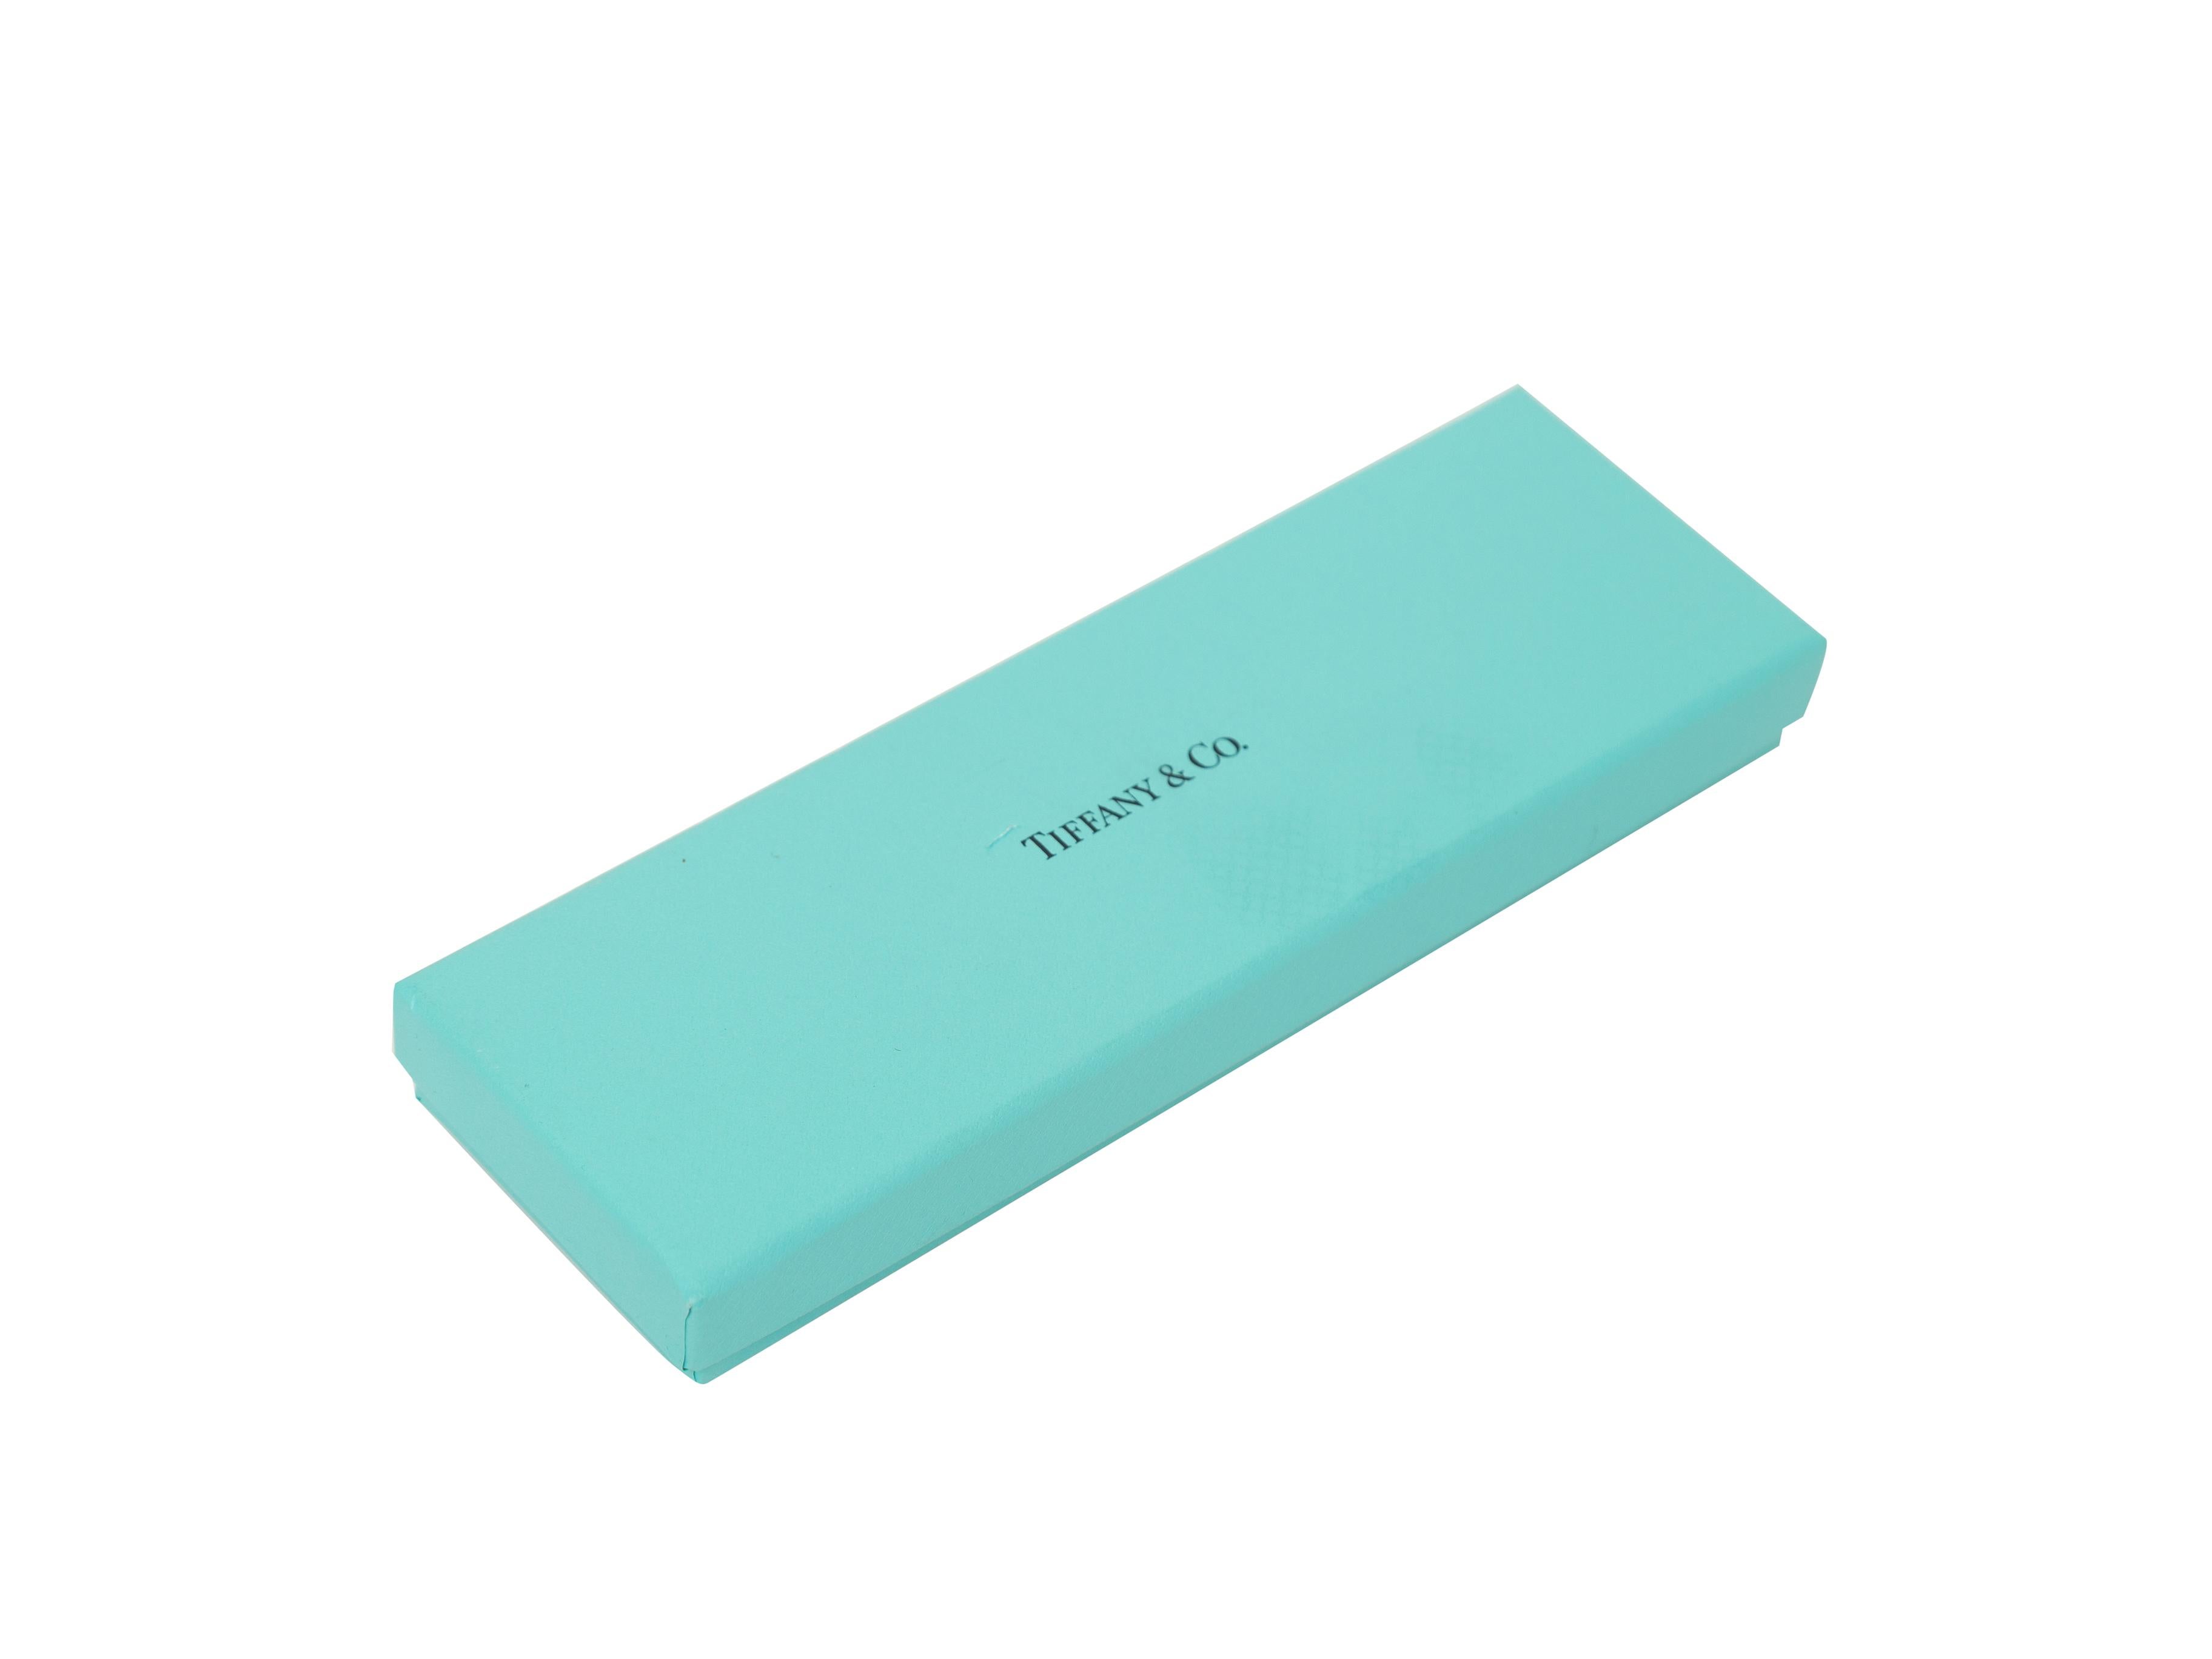 Product Details: Light blue and sterling silver pen by Tiffany & Co. 4.5